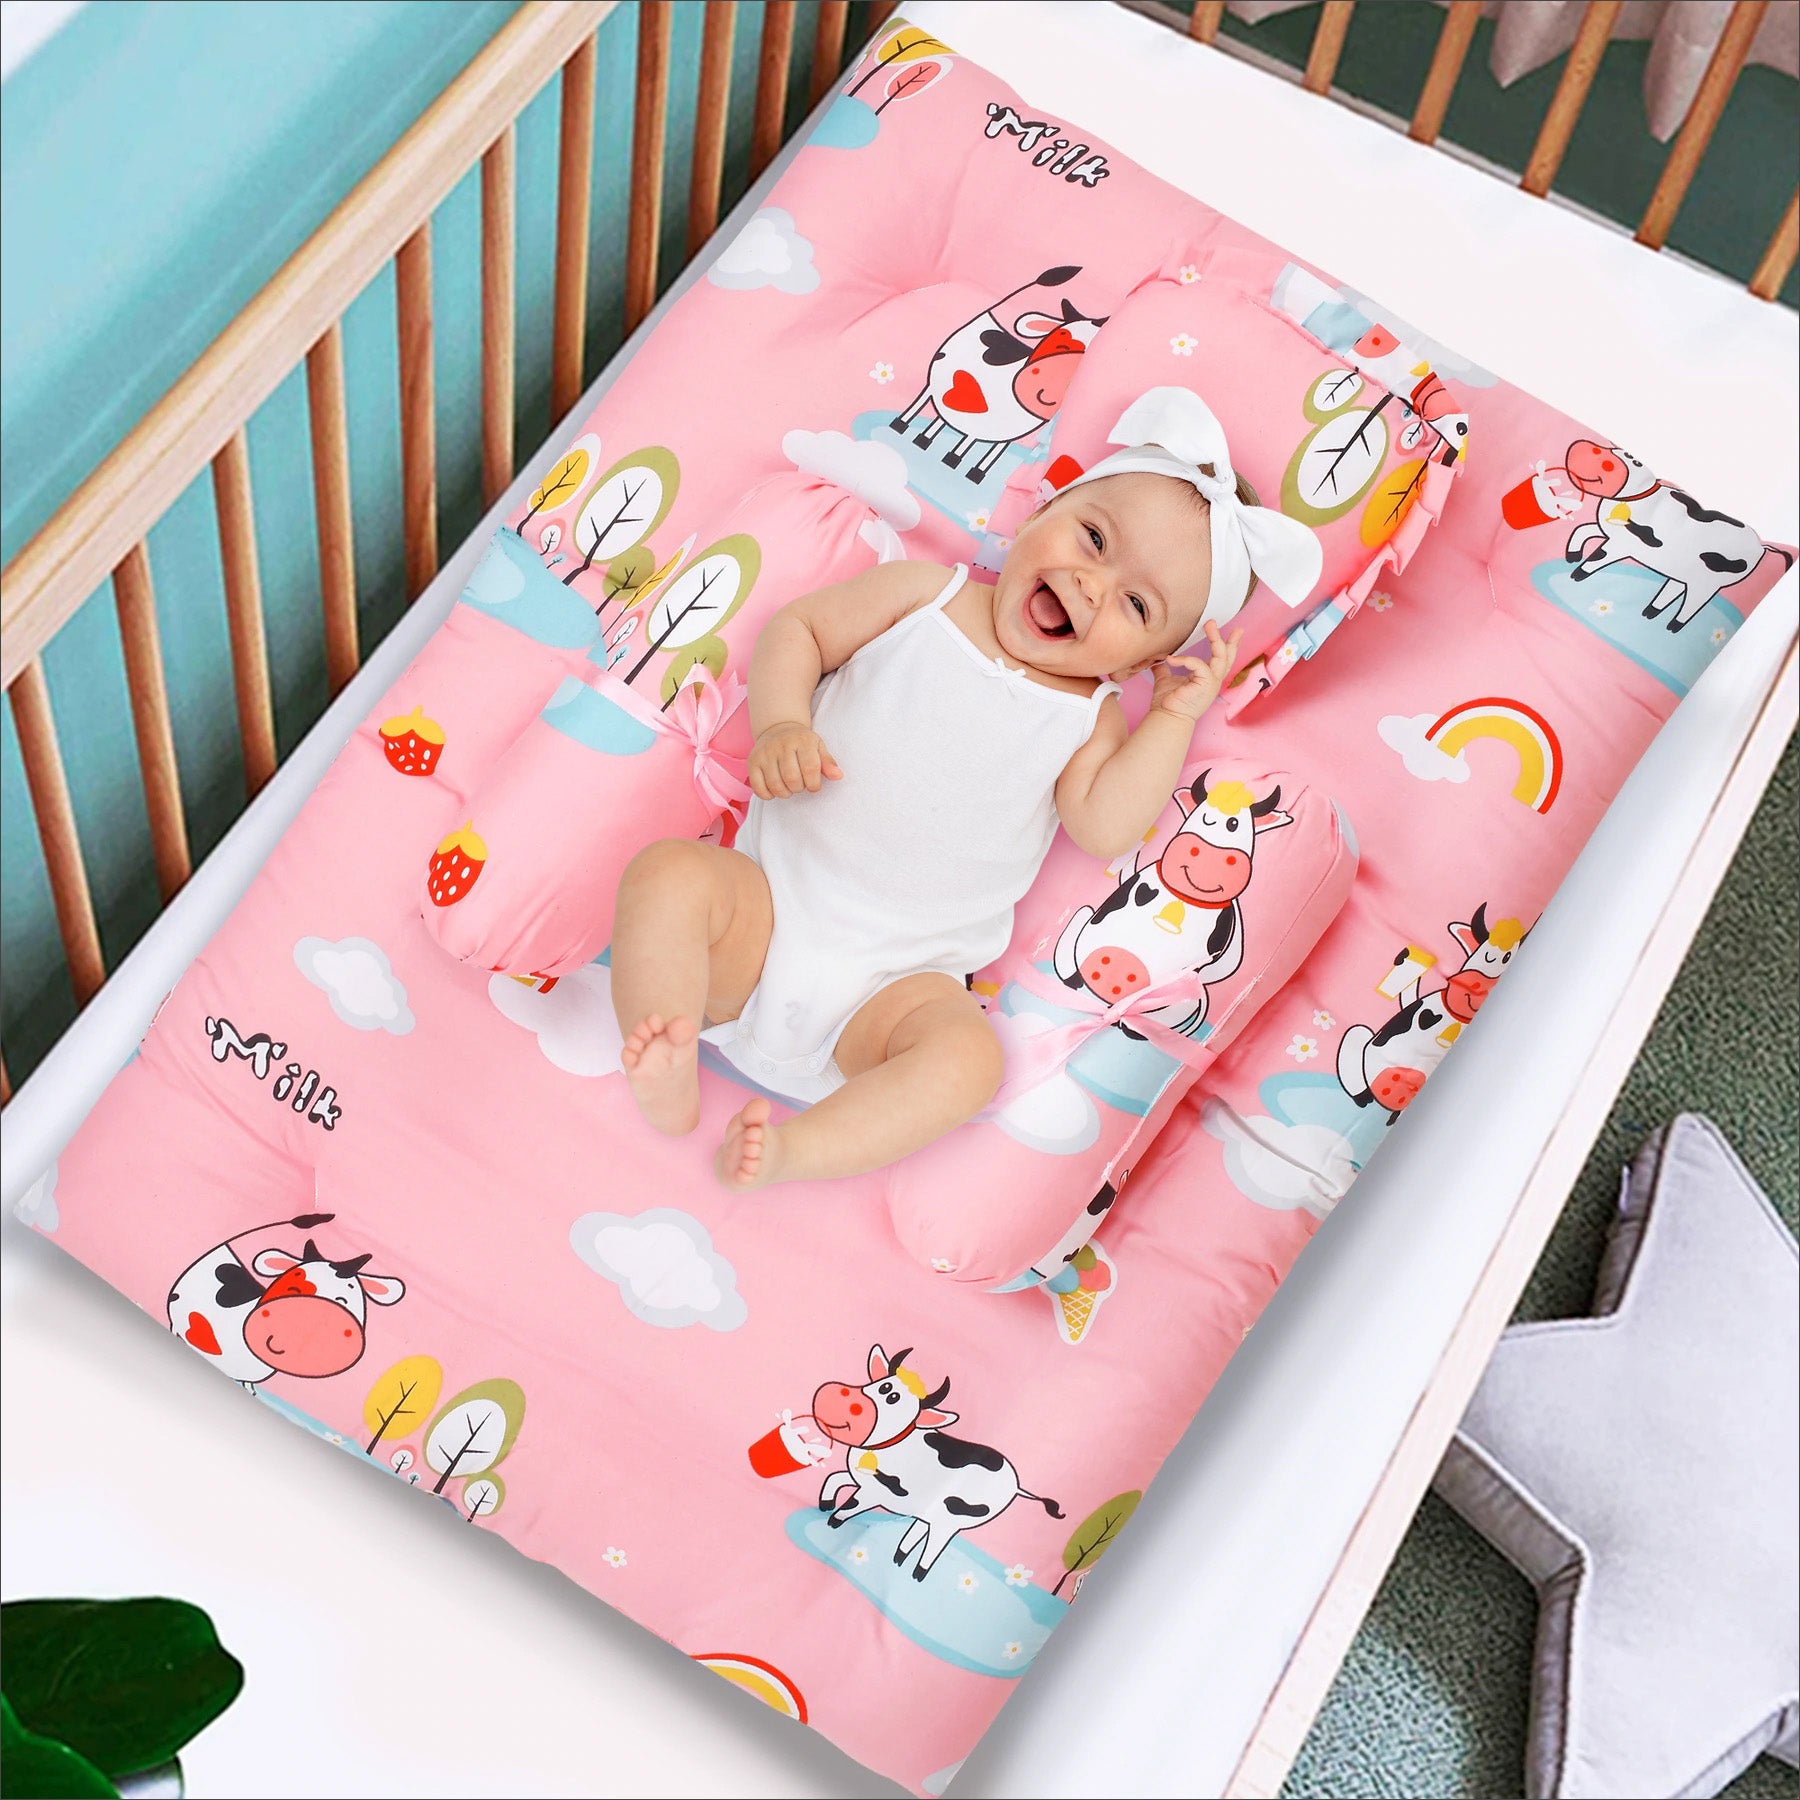 Mattress Set With Neck Pillow and Bolsters Milkaholic Peach - Baby Moo